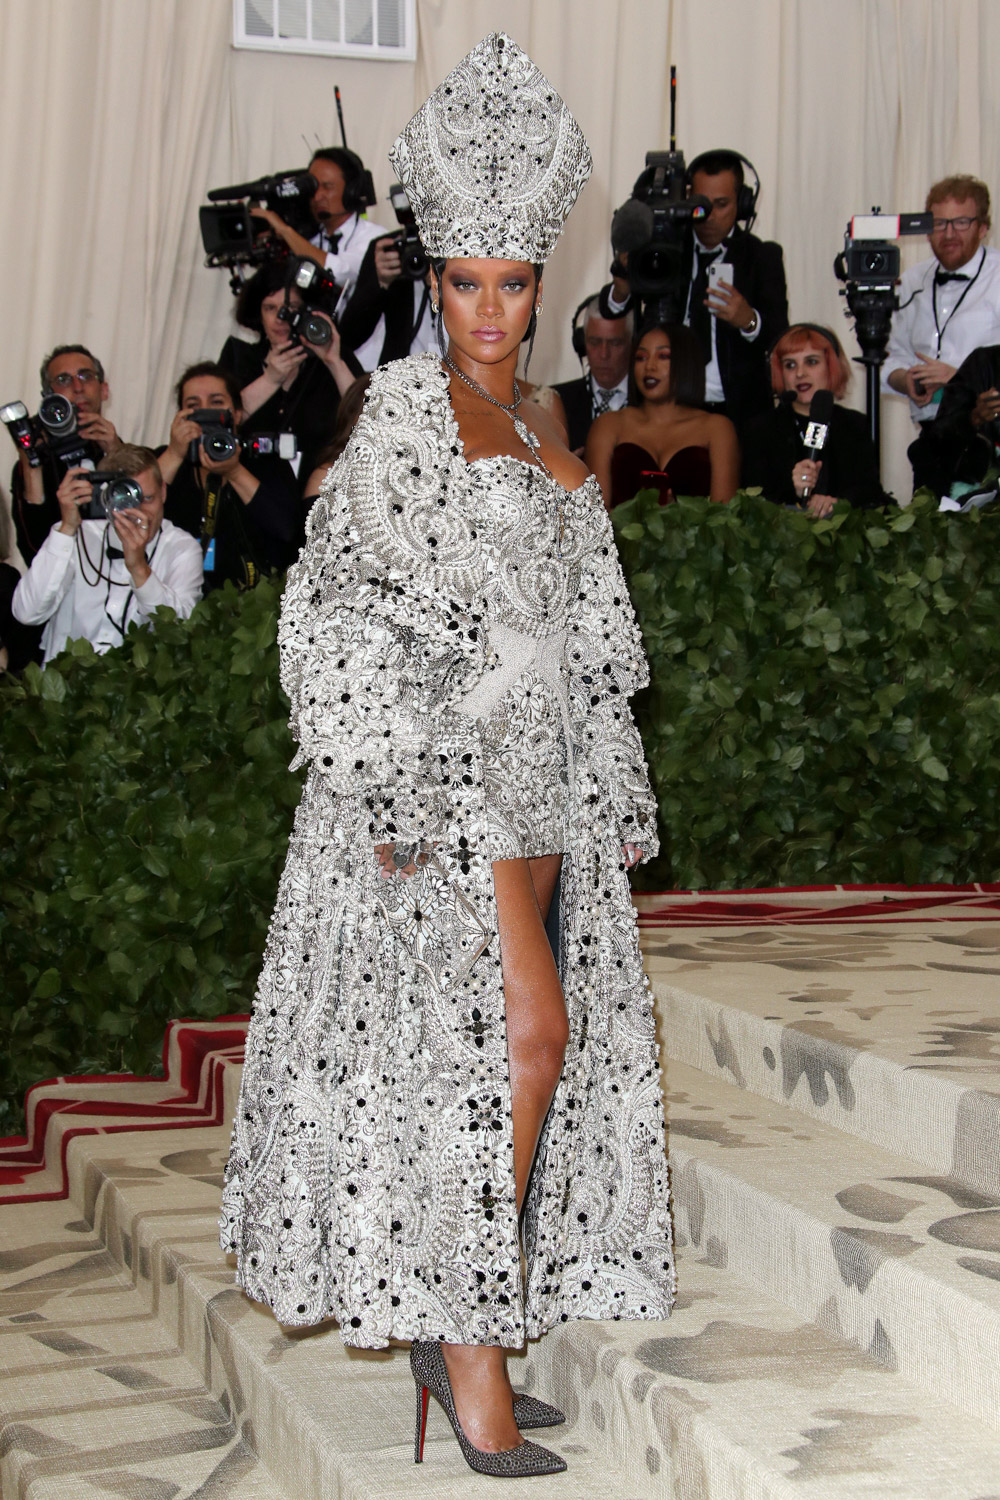 Best Met Gala Dresses And Gowns of All Time